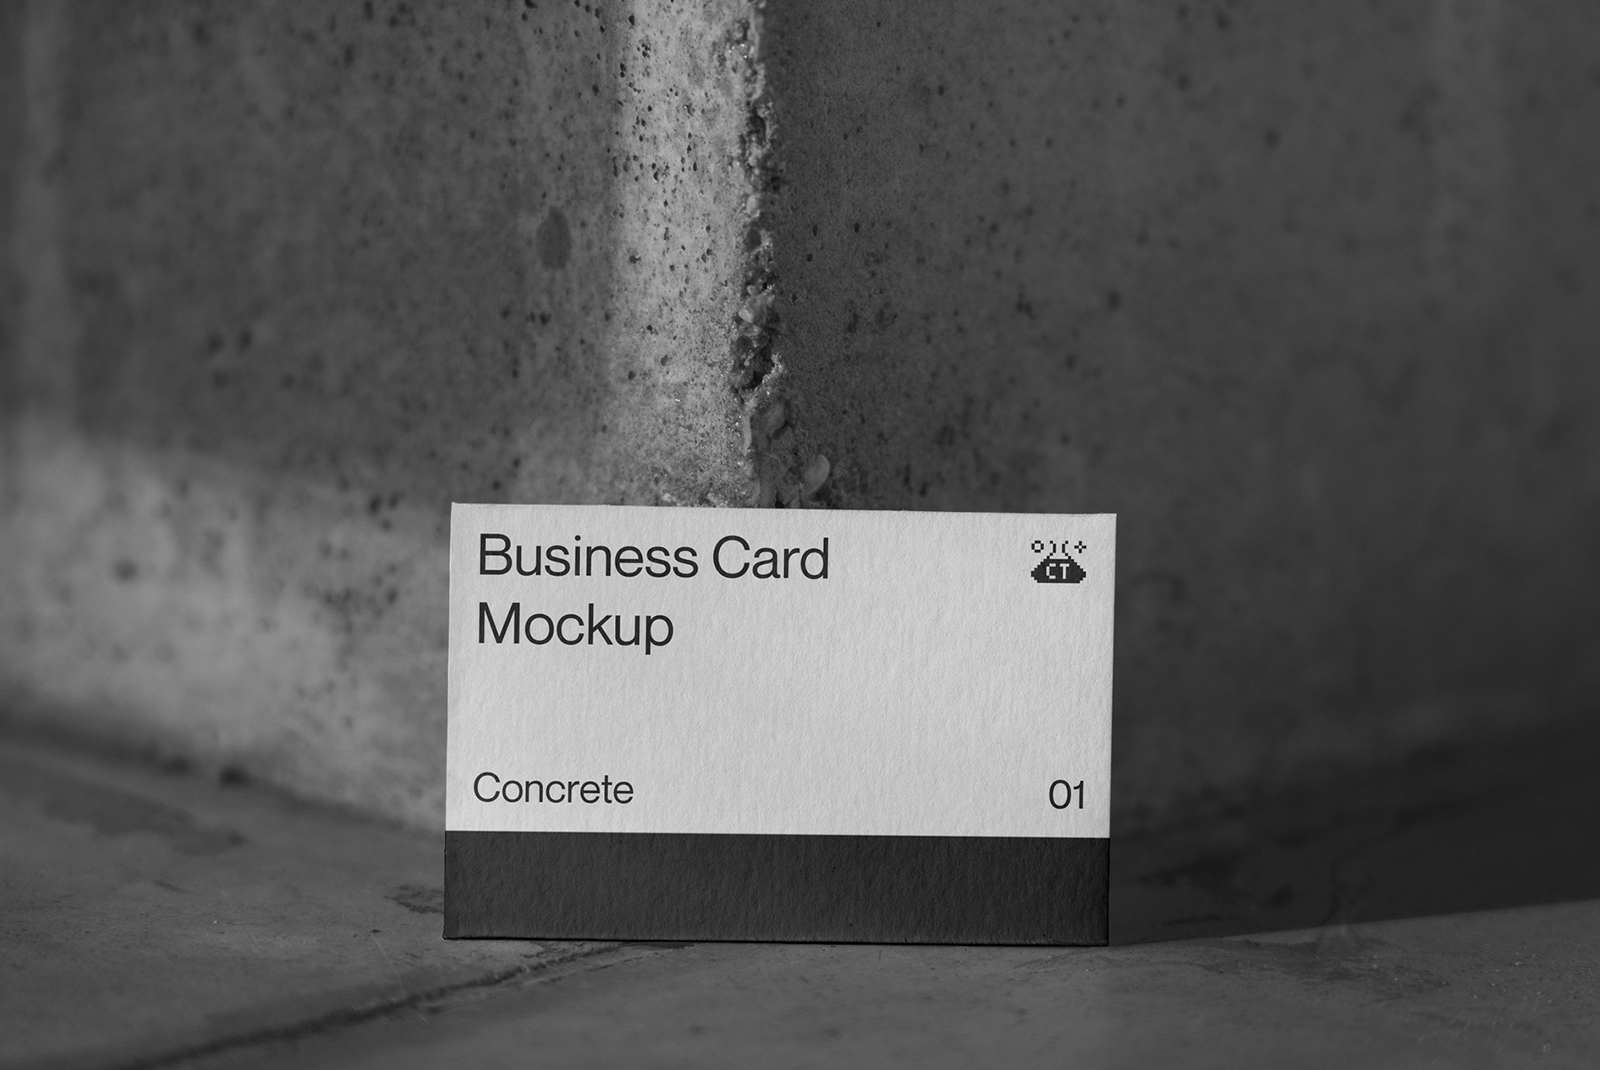 Black and white business card mockup leaning against a concrete wall, minimalistic design style, realistic textures, essential for branding.